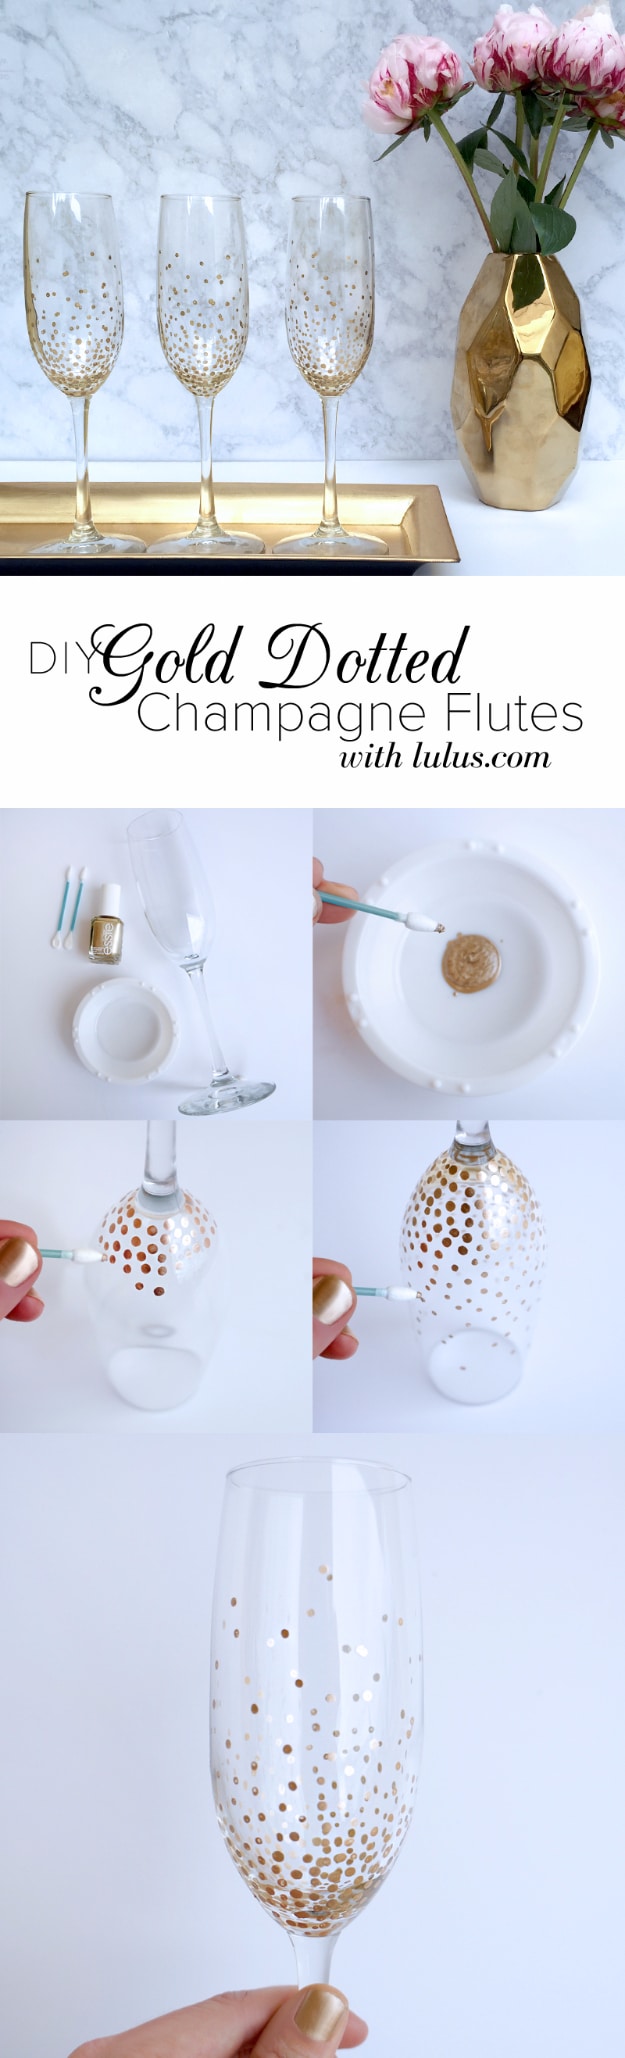 Cheap Crafts To Make and Sell - Gold Dot Champagne Flutes - Inexpensive Ideas for DIY Craft Projects You Can Make and Sell On Etsy, at Craft Fairs, Online and in Stores. Quick and Cheap DIY Ideas that Adults and Even Teens Can Make on A Budget #diy #crafts #craftstosell #cheapcrafts